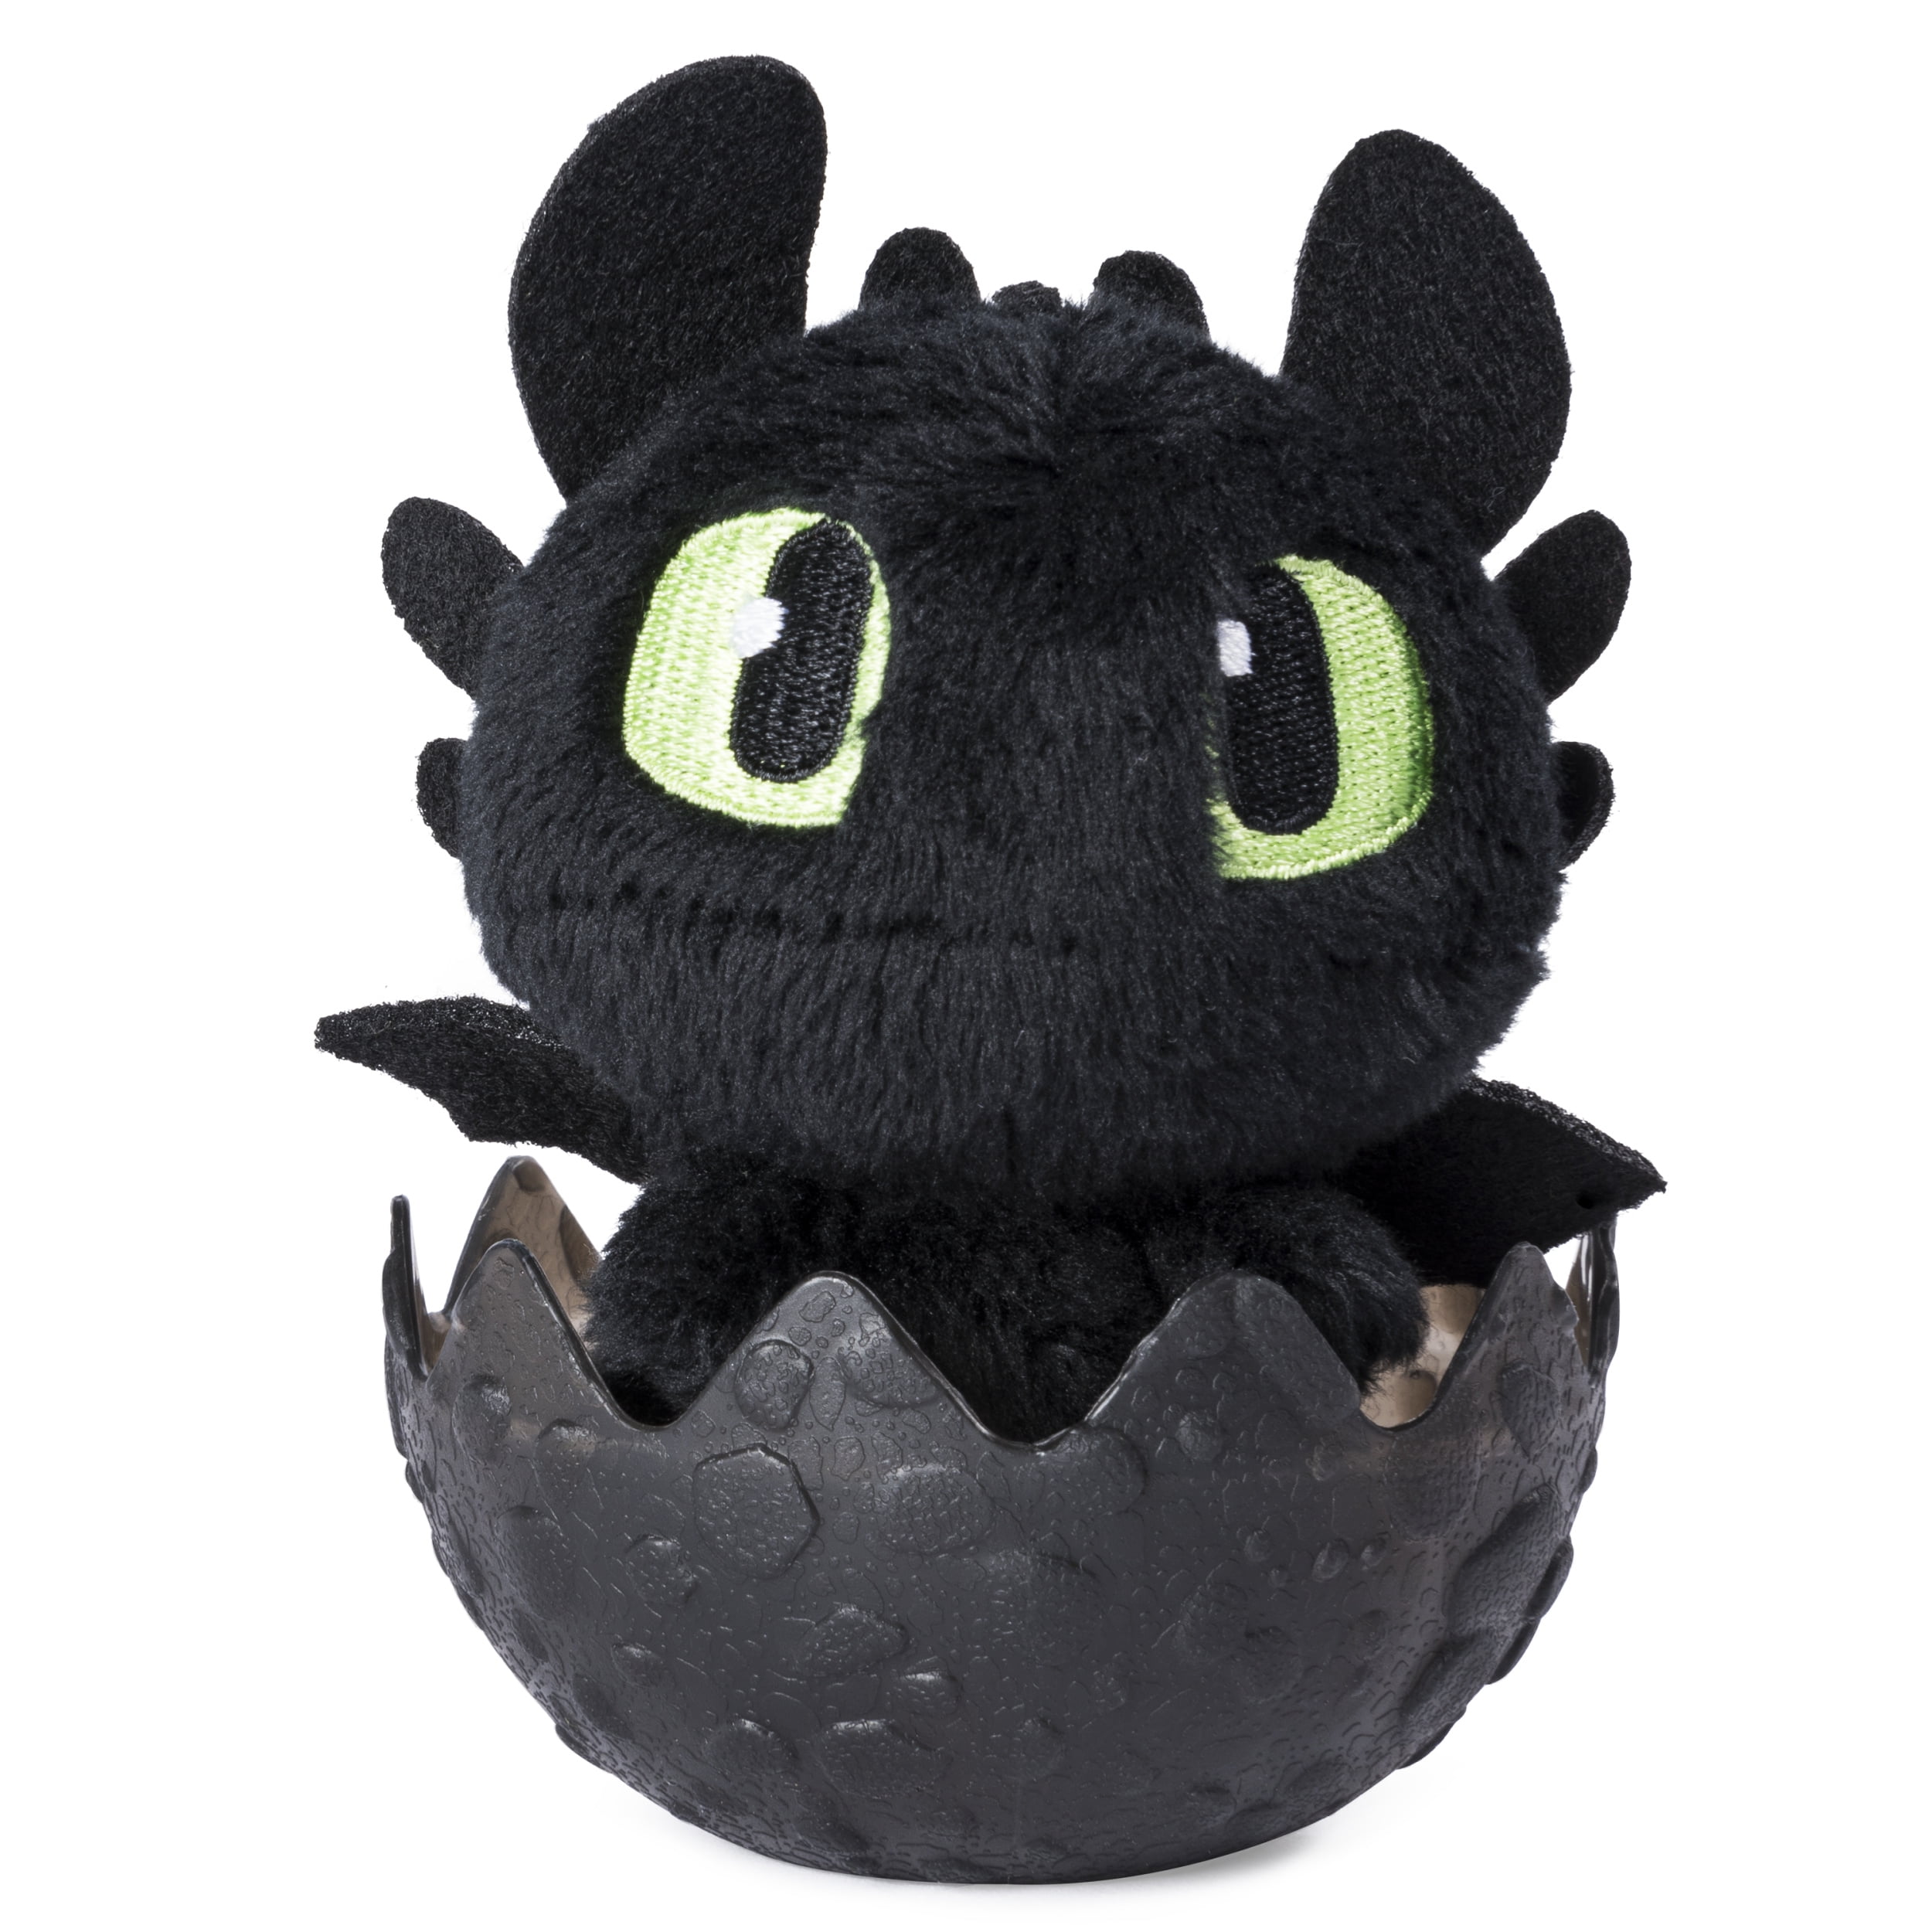 DreamWorks Dragons, Baby Toothless 3 